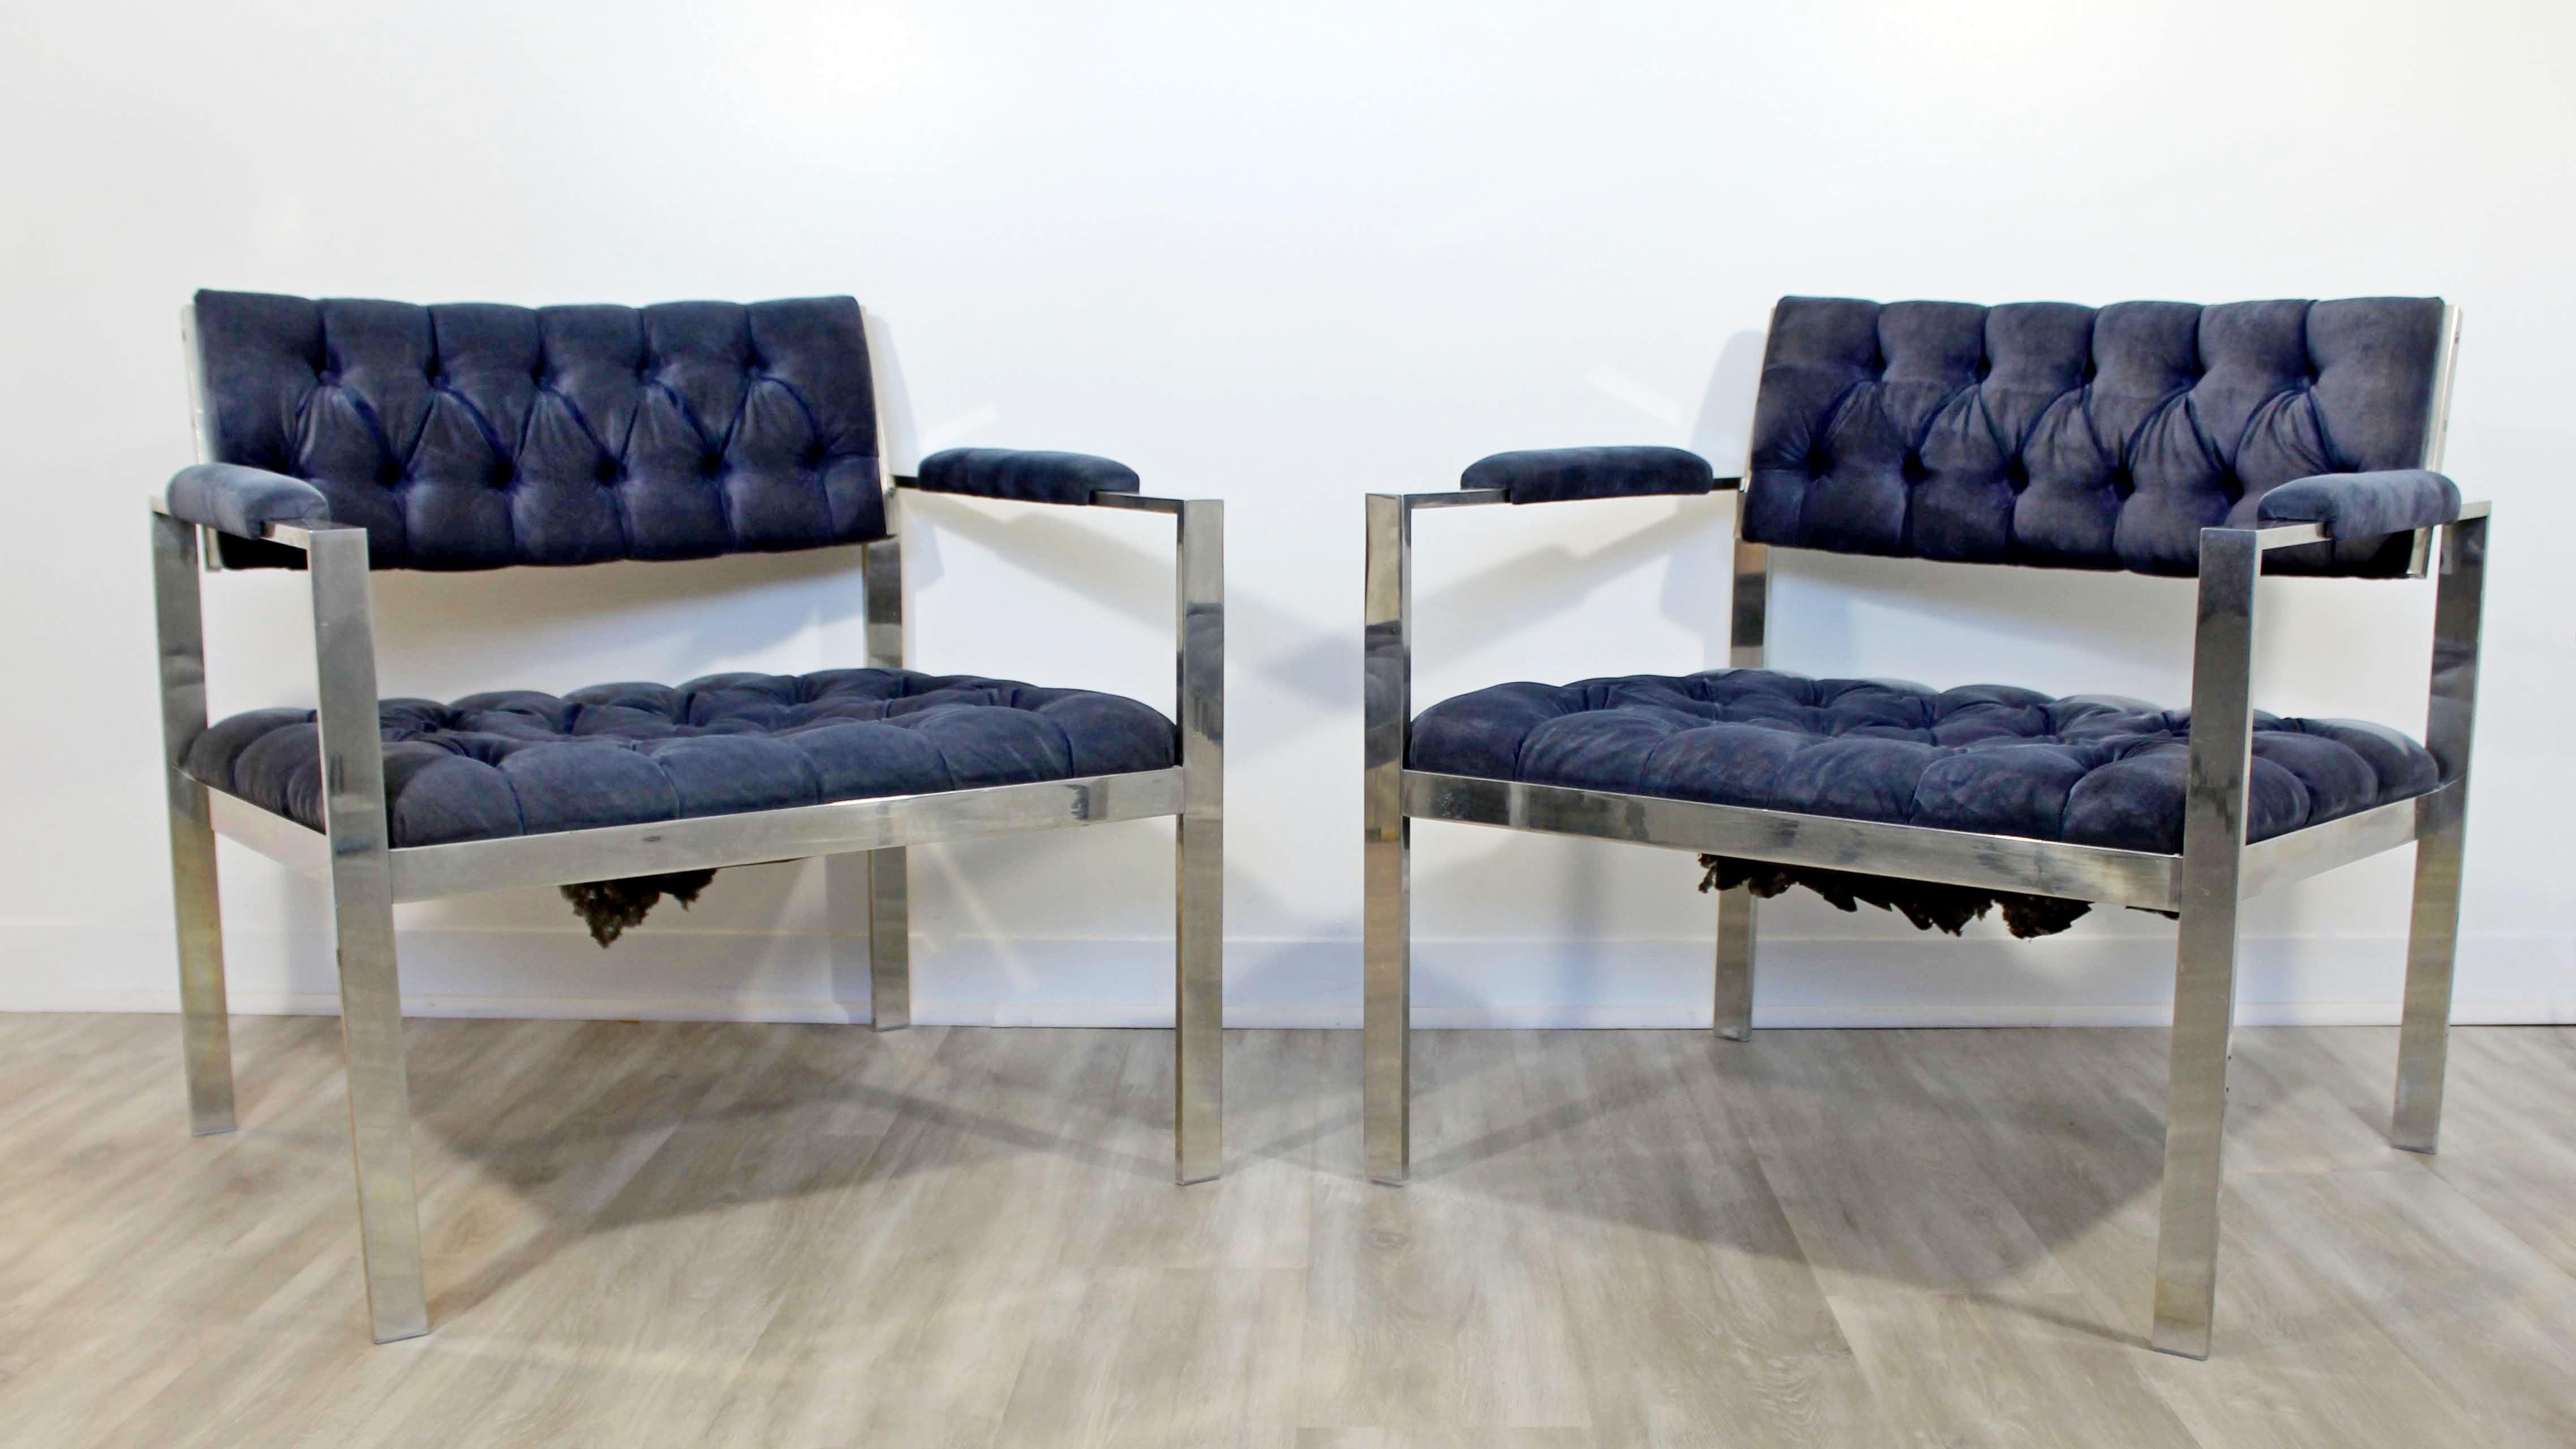 For your consideration are a phenomenally chic pair of Harvey Probber chairs and ottoman, with tufted blue velvet on chrome bases, circa the 1970s. In very good vintage condition with some spots on the fabric. The dimensions of the chairs are 29